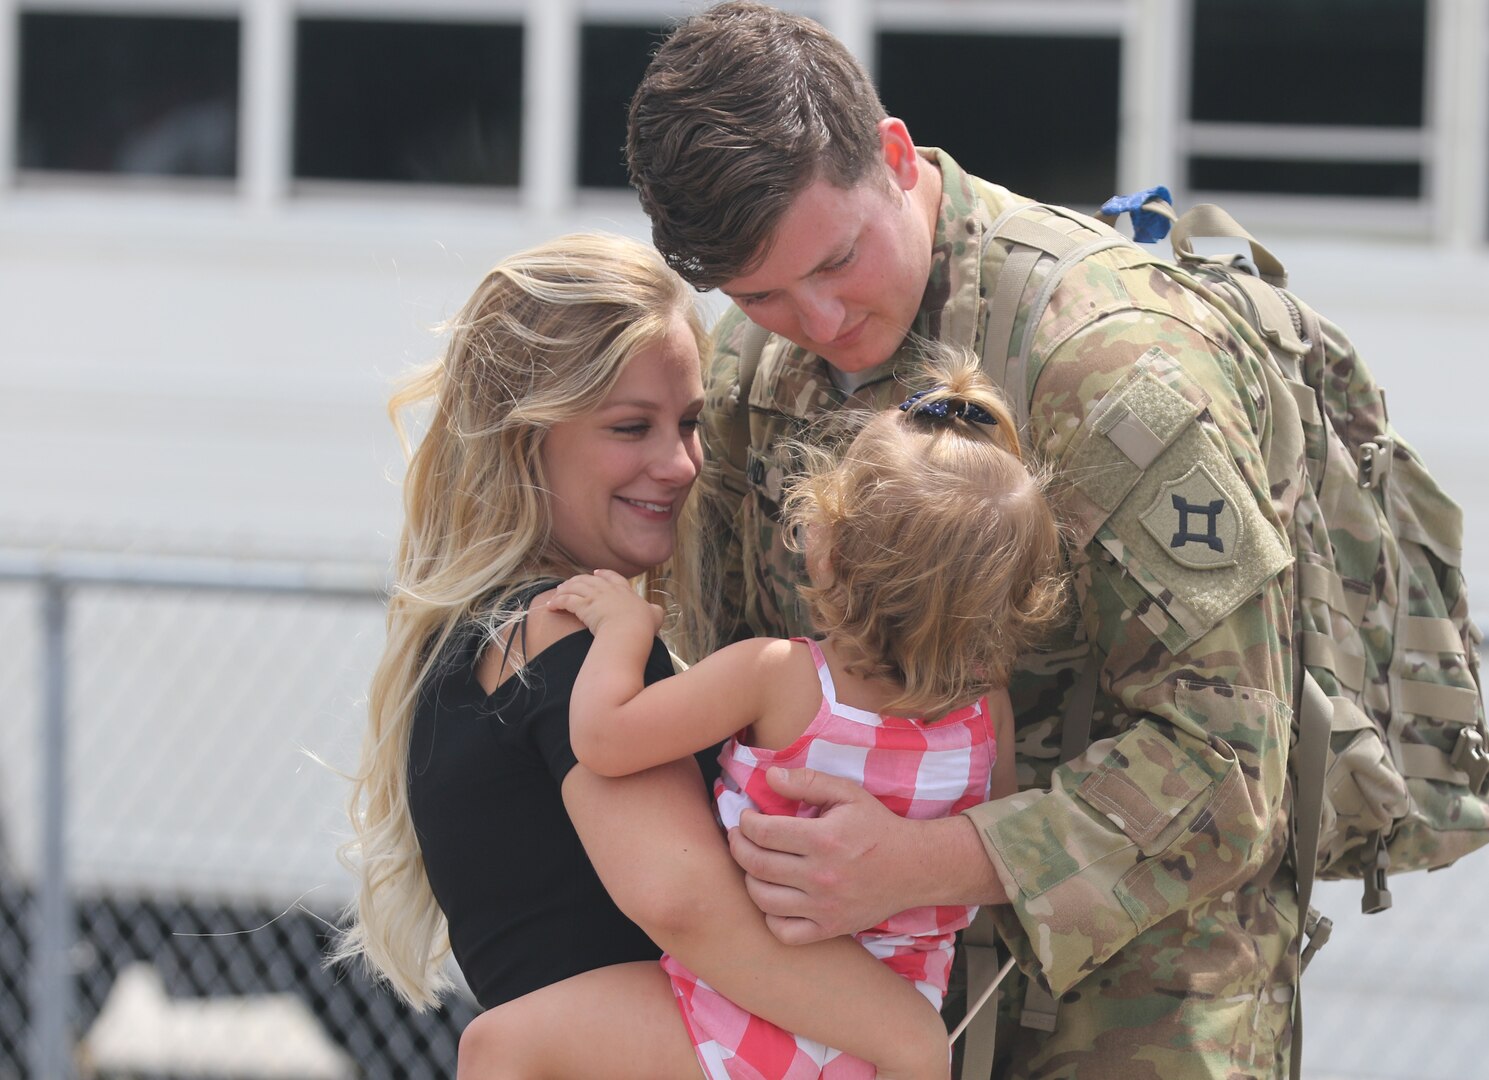 Spc. Alexander Rowland greets his wife, Christine Rowland, and daughter at Jacksonville International Airport near Jacksonville, Florida, on April 29, 2017. A crew chief with the Florida National Guard's 1st Battalion, 111th Aviation Regiment, General Support Aviation Battalion, Spc. Rowland has just returned from an 11-month deployment to Kuwait. Soldiers who are nearing retirement should consider participating in the Survivor Benefit Plan, which provides a monthly annuity to the spouse and/or children of a retiree who dies.